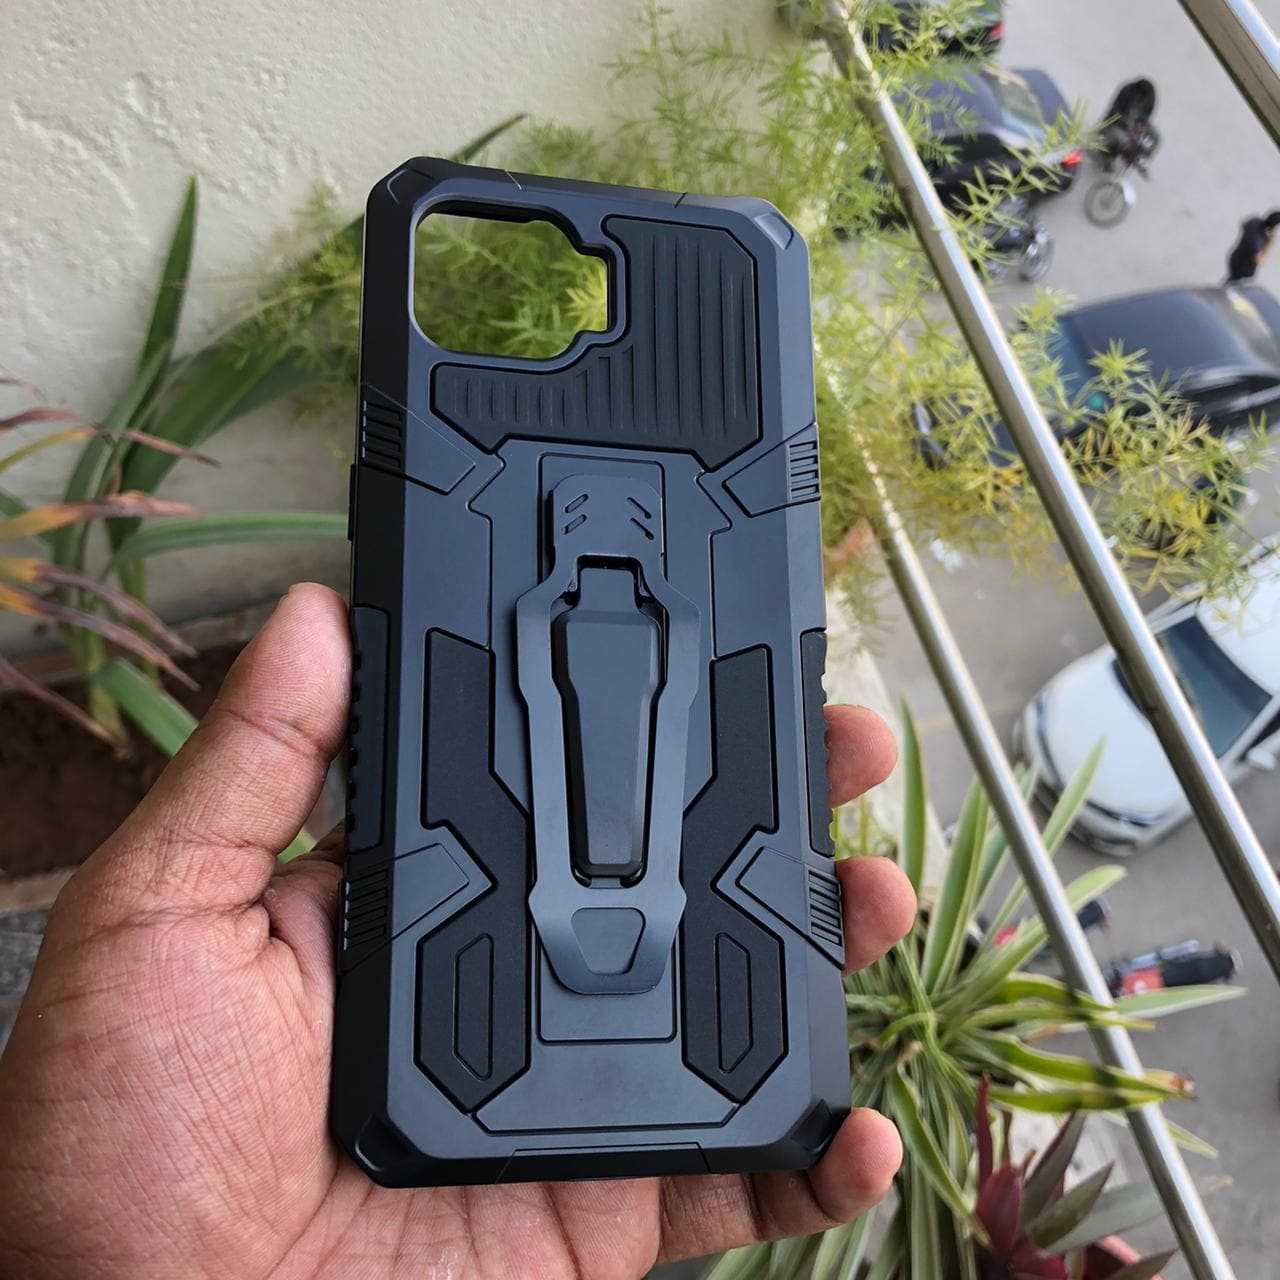 iCrystal Branded Military Army Grade Hybrid shock Proof Case For All Oppo Models